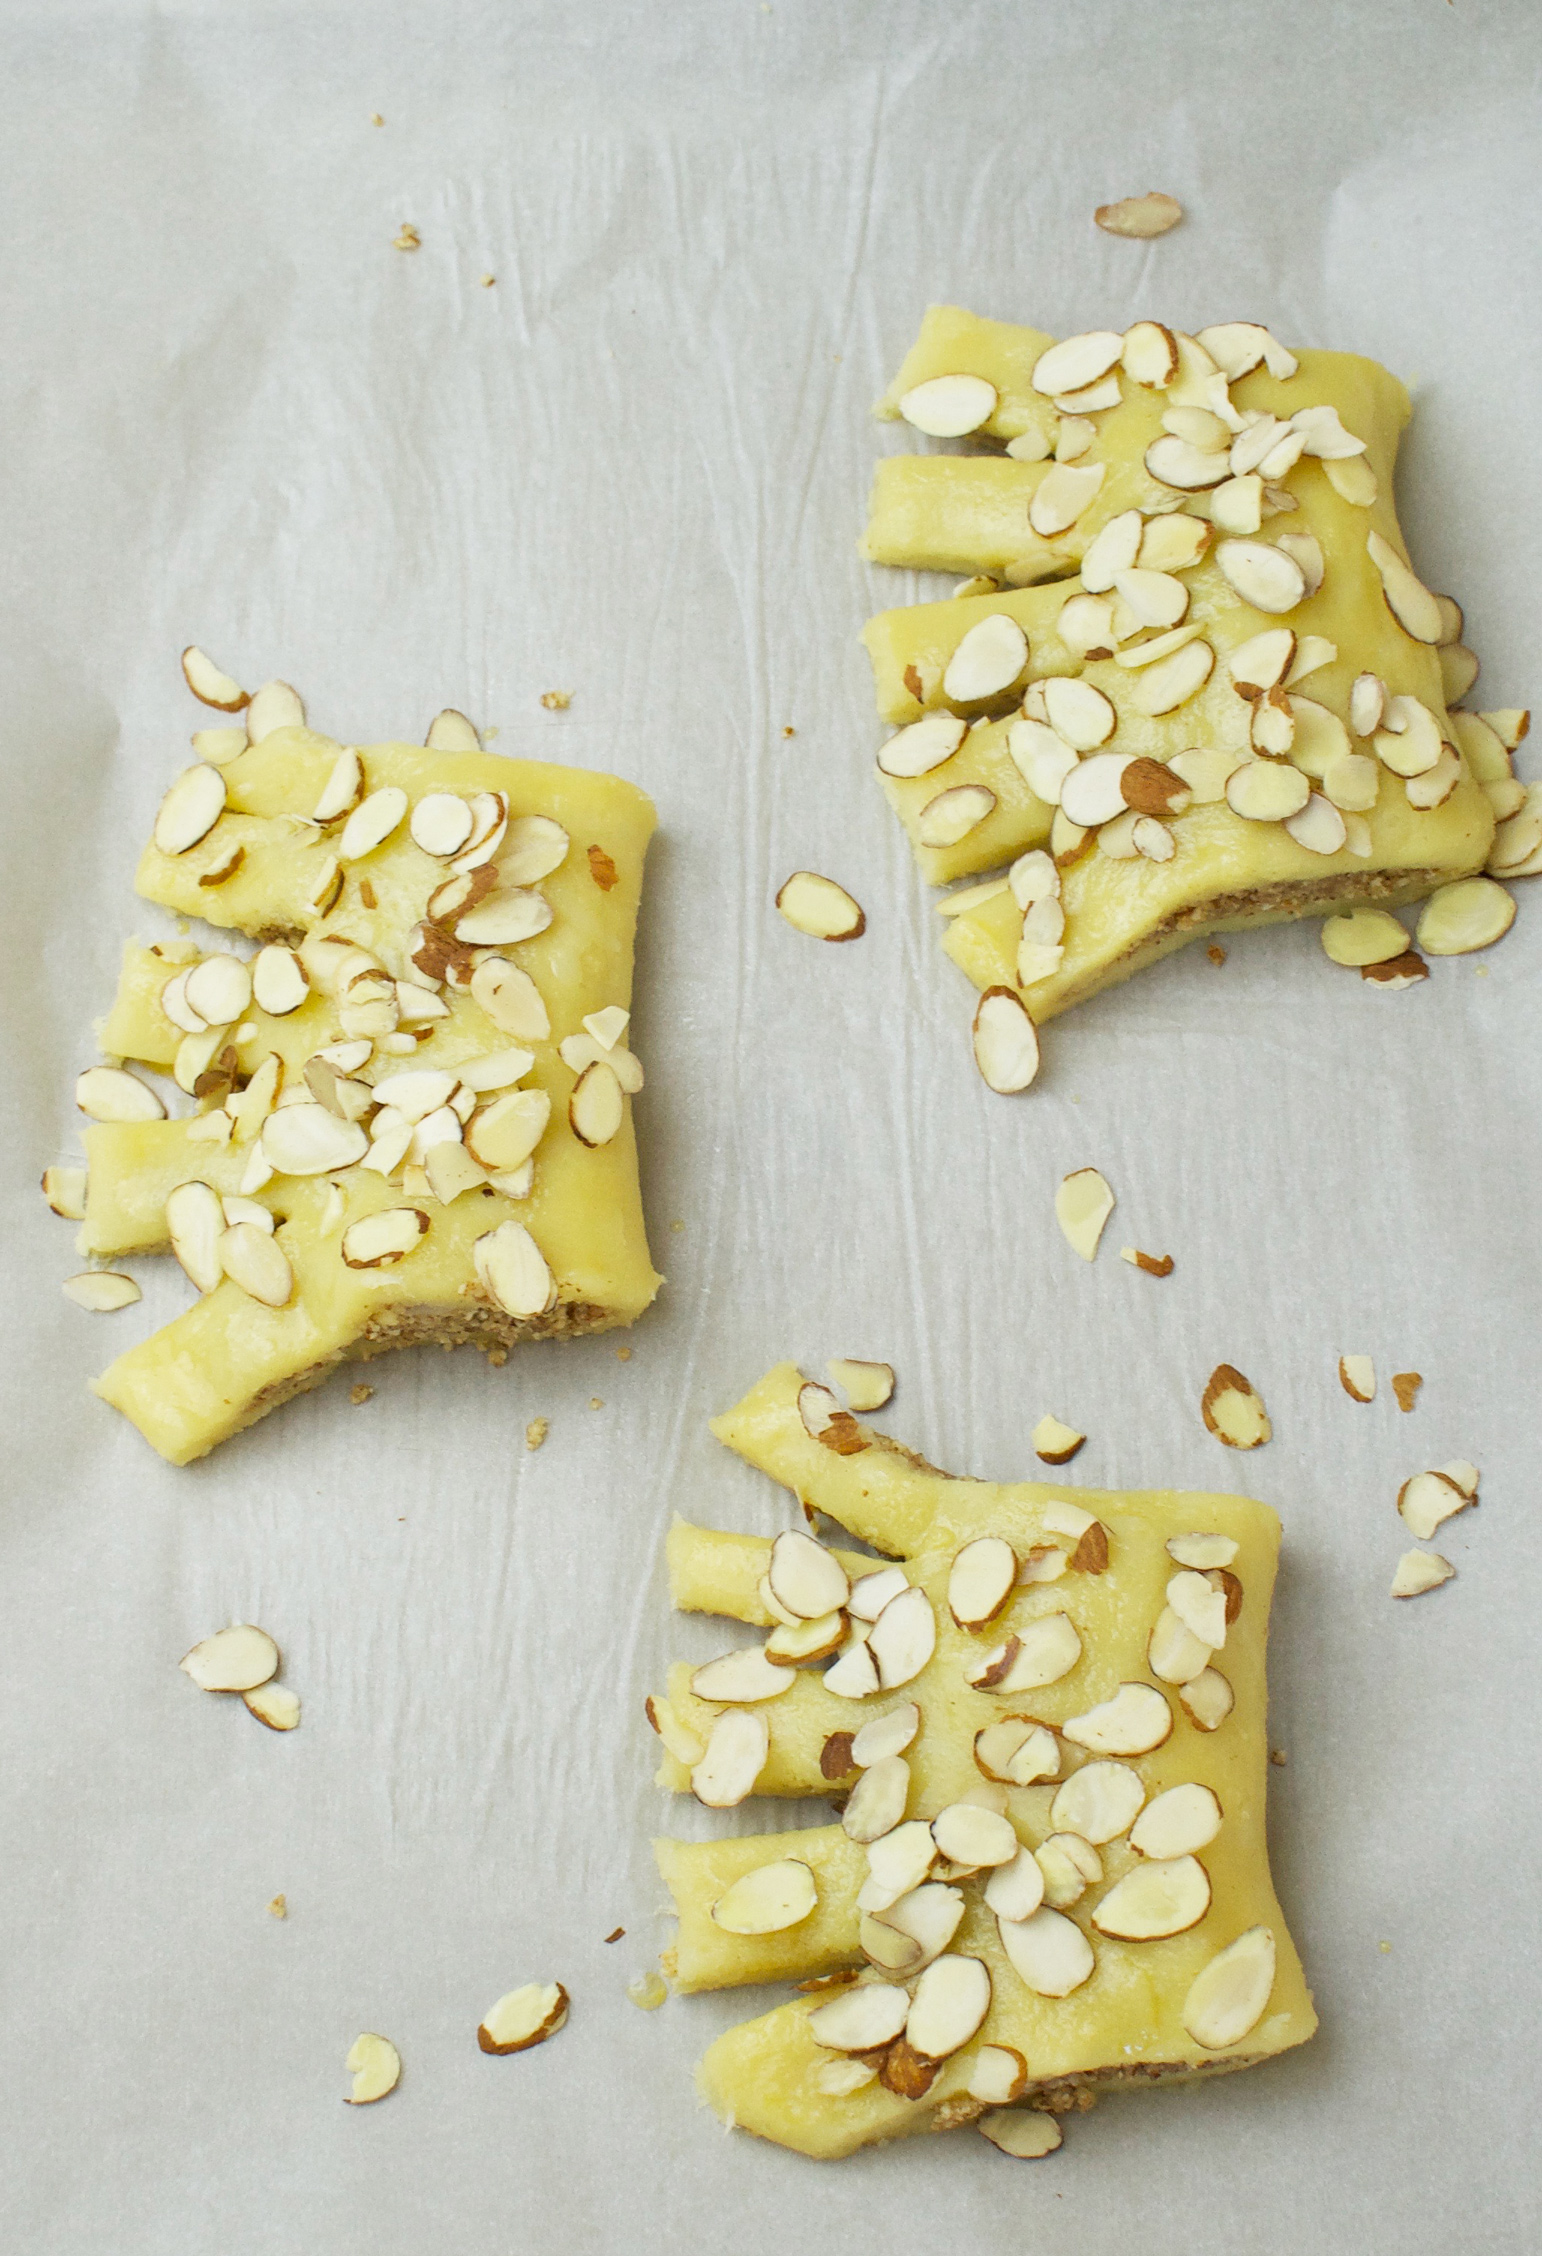 Bear claws with egg wash and almonds sprinkled on top